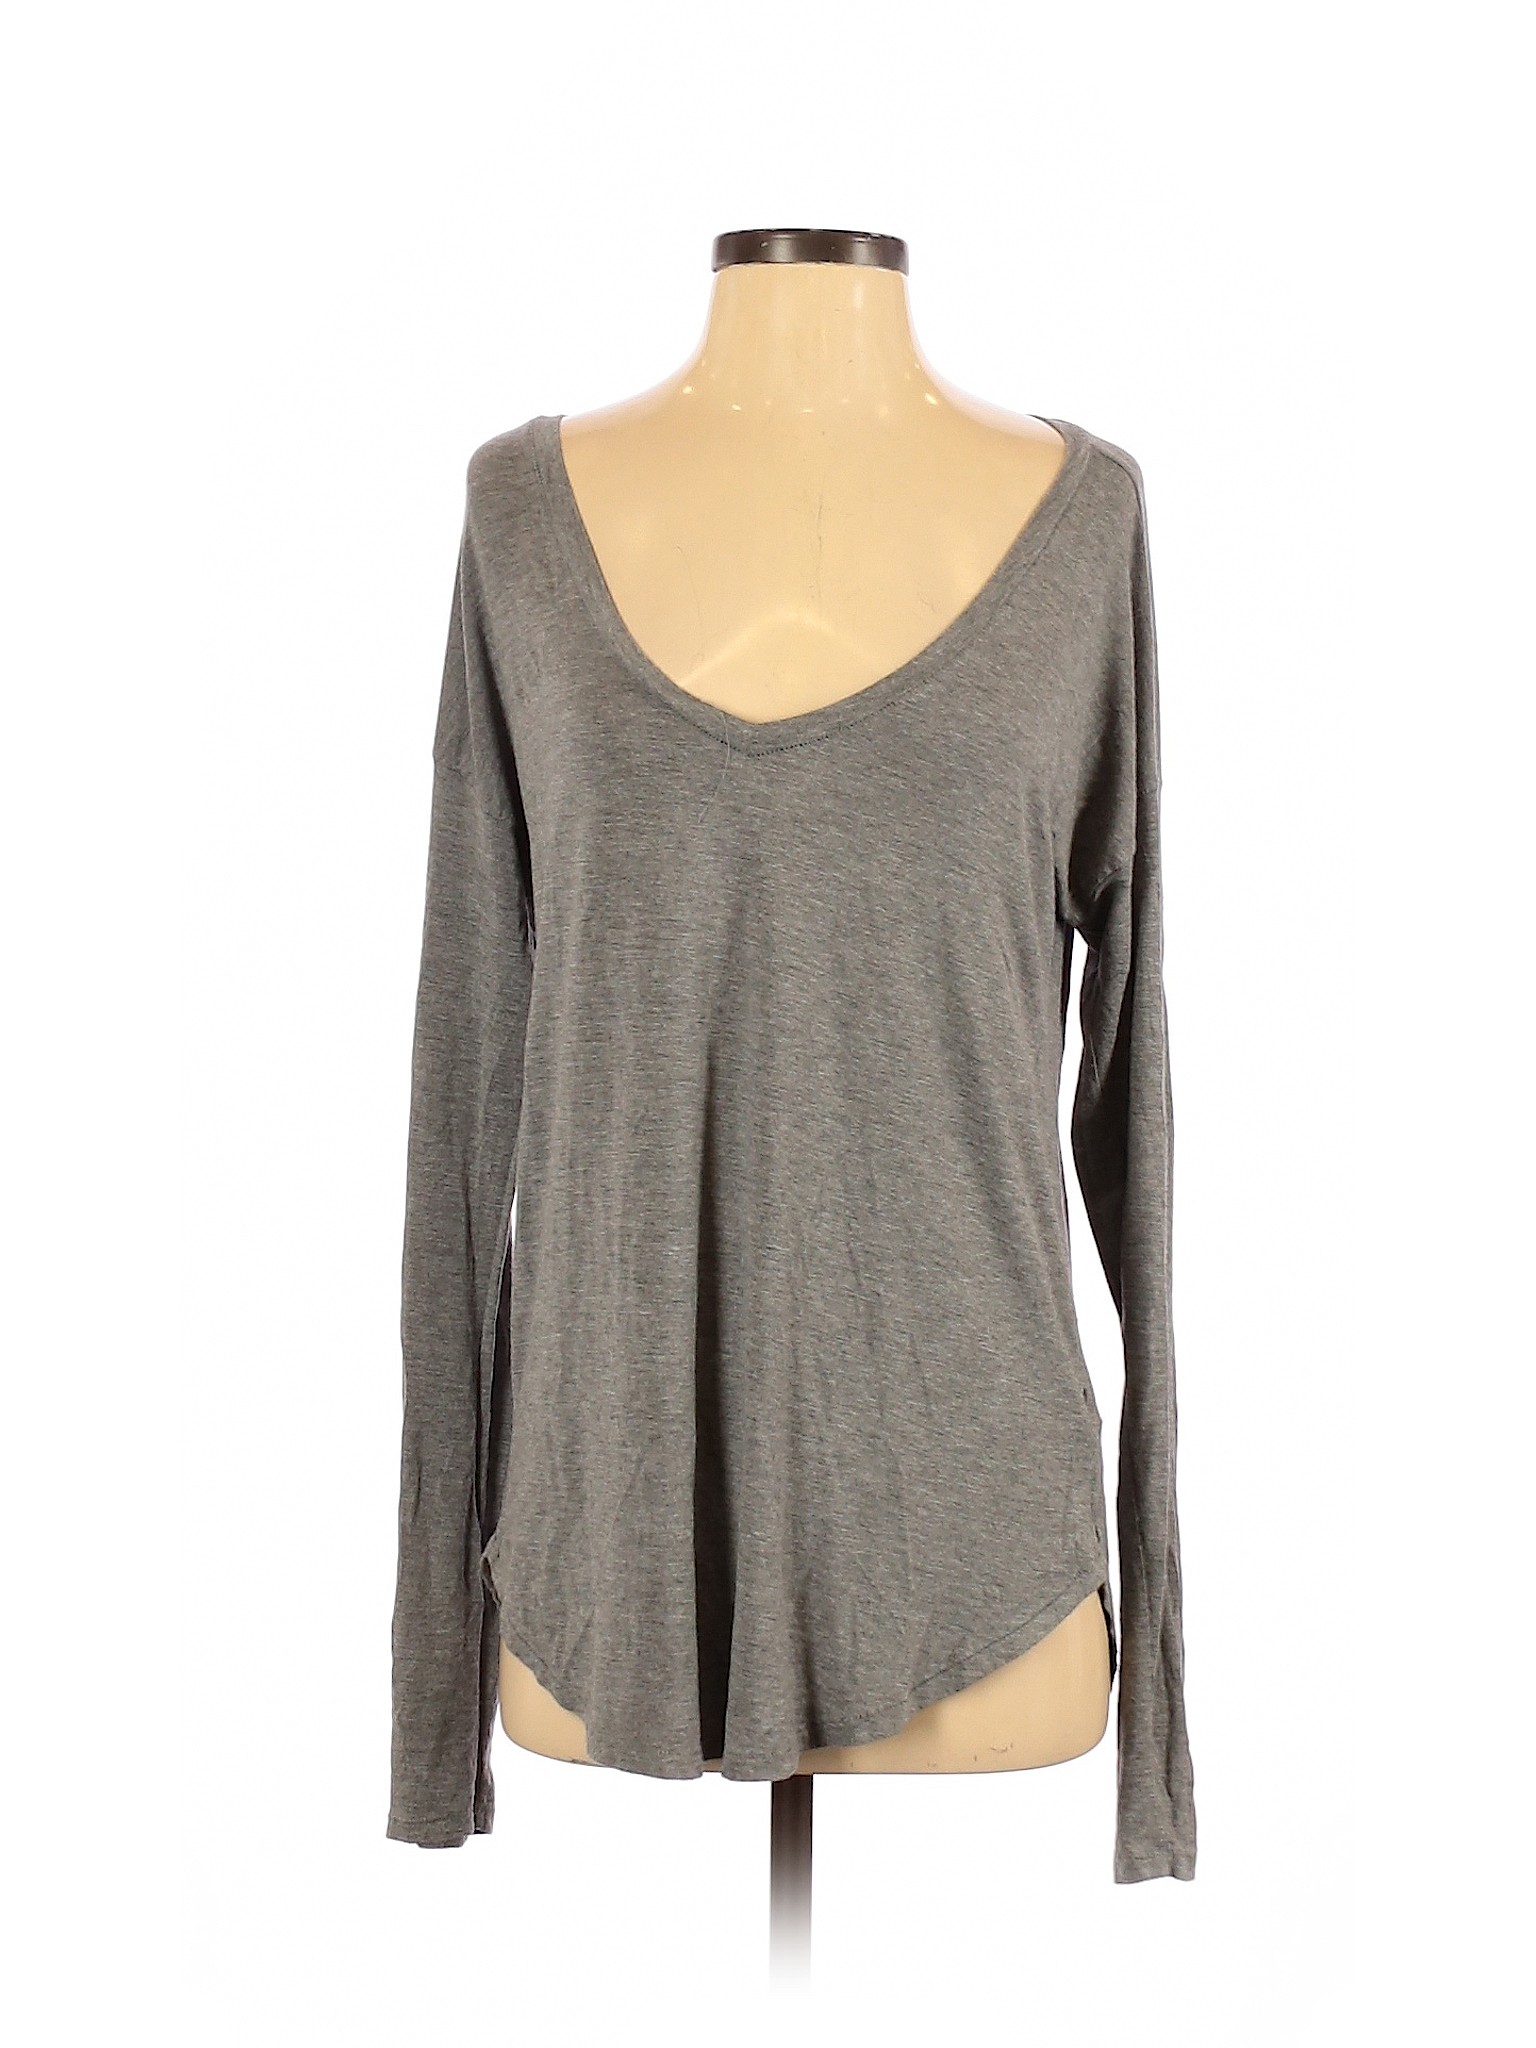 American Eagle Outfitters Women Gray Long Sleeve T-Shirt M | eBay